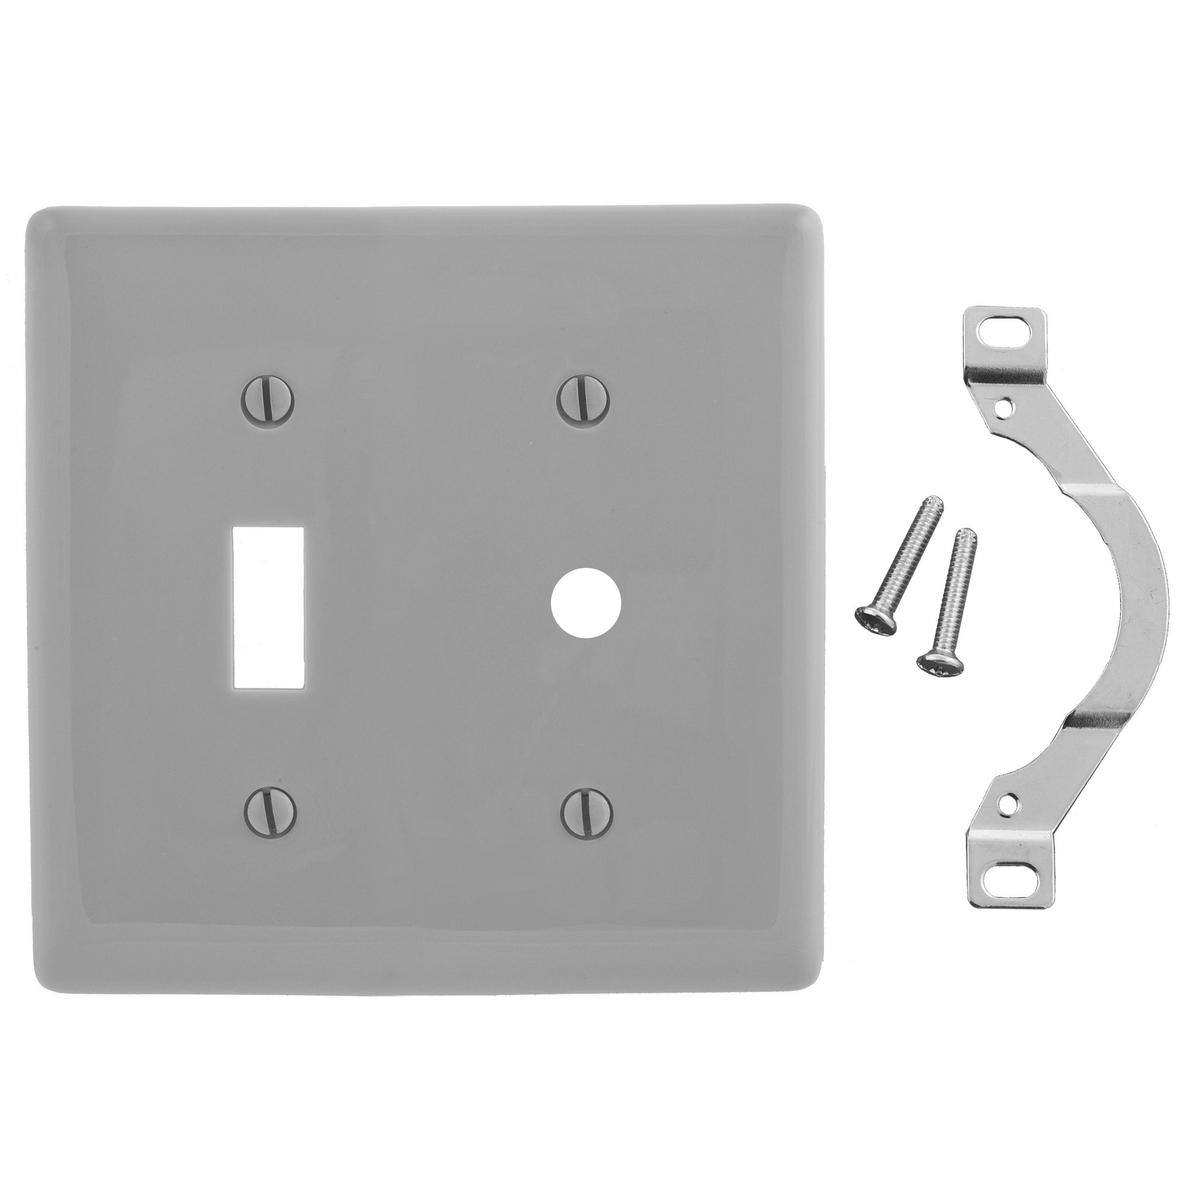 Hubbell NP112GY Wallplates, Nylon, 2-Gang, 1) Toggle, 1) .406" Opening, Gray  ; Reinforcement ribs for extra strength ; High-impact, self-extinguishing nylon material ; Captive screw feature holds mounting screw in place ; Standard Size is 1/8" larger to give you extra c